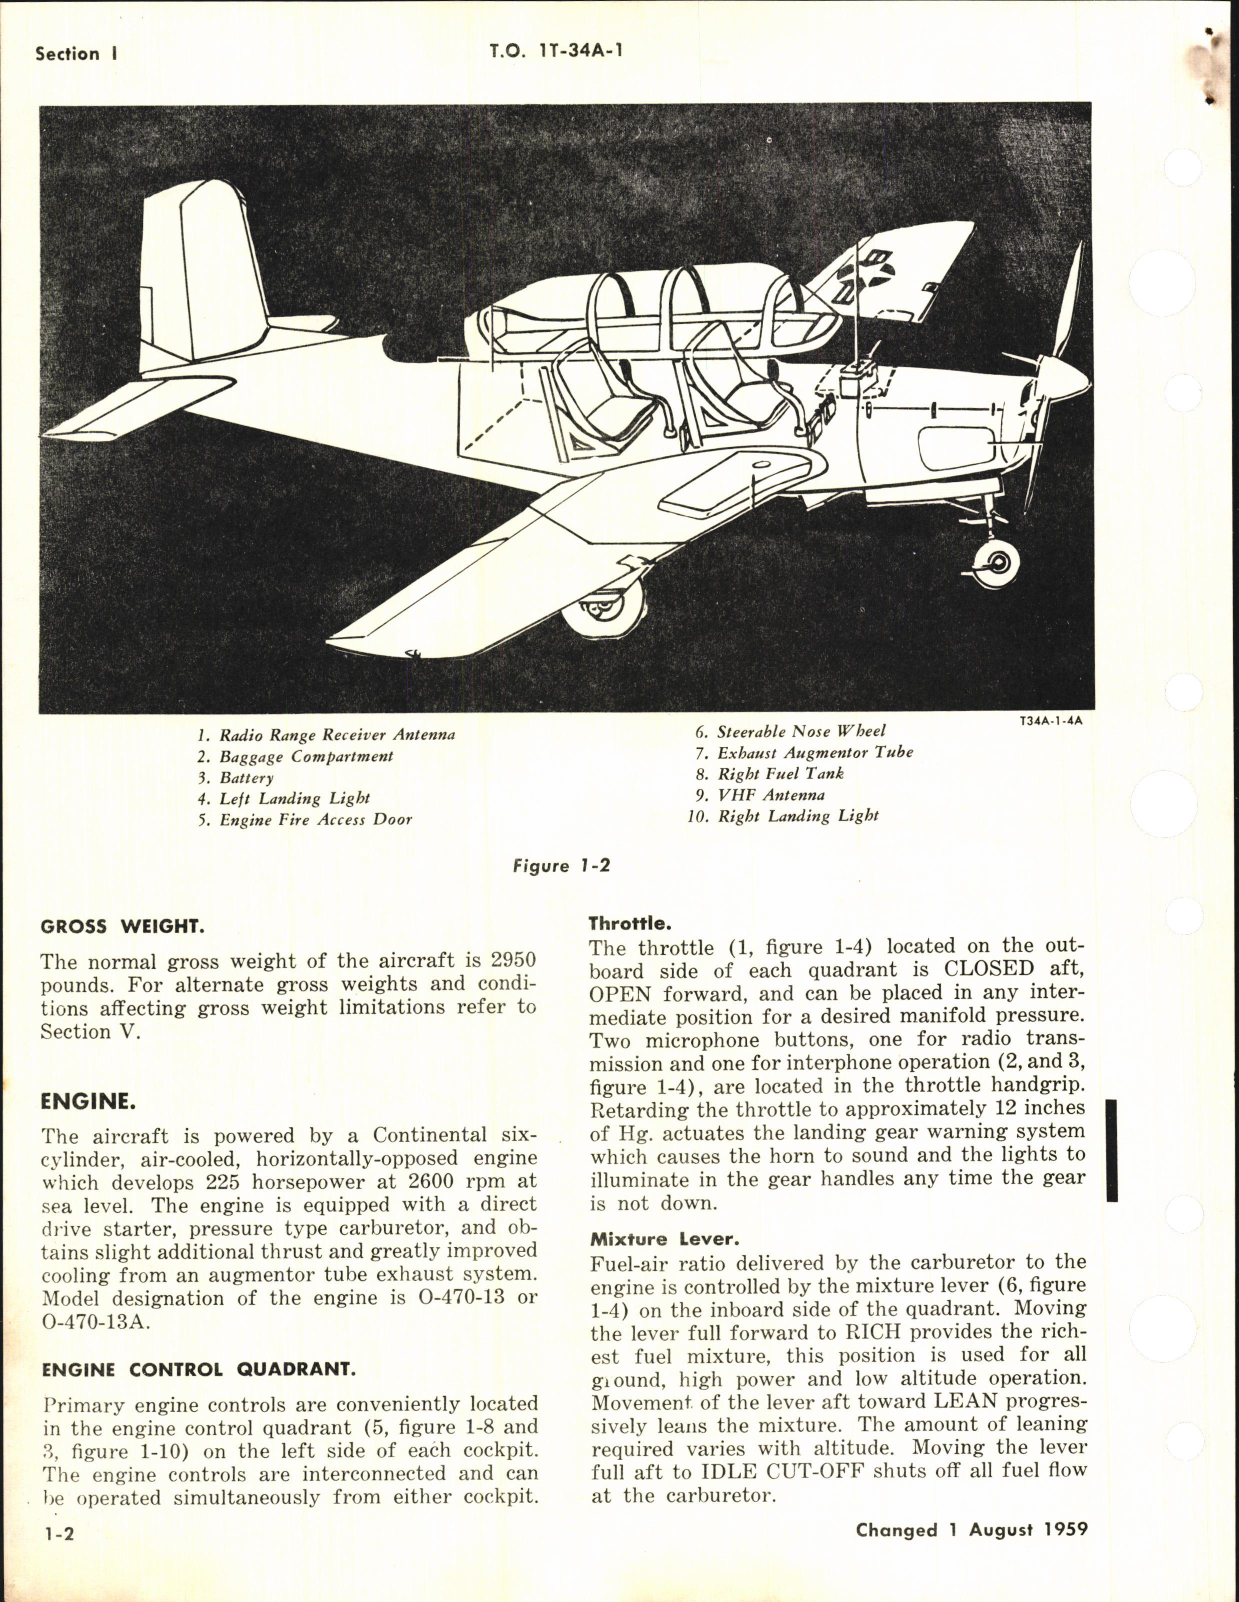 Sample page 8 from AirCorps Library document: Flight Manual for T-34A